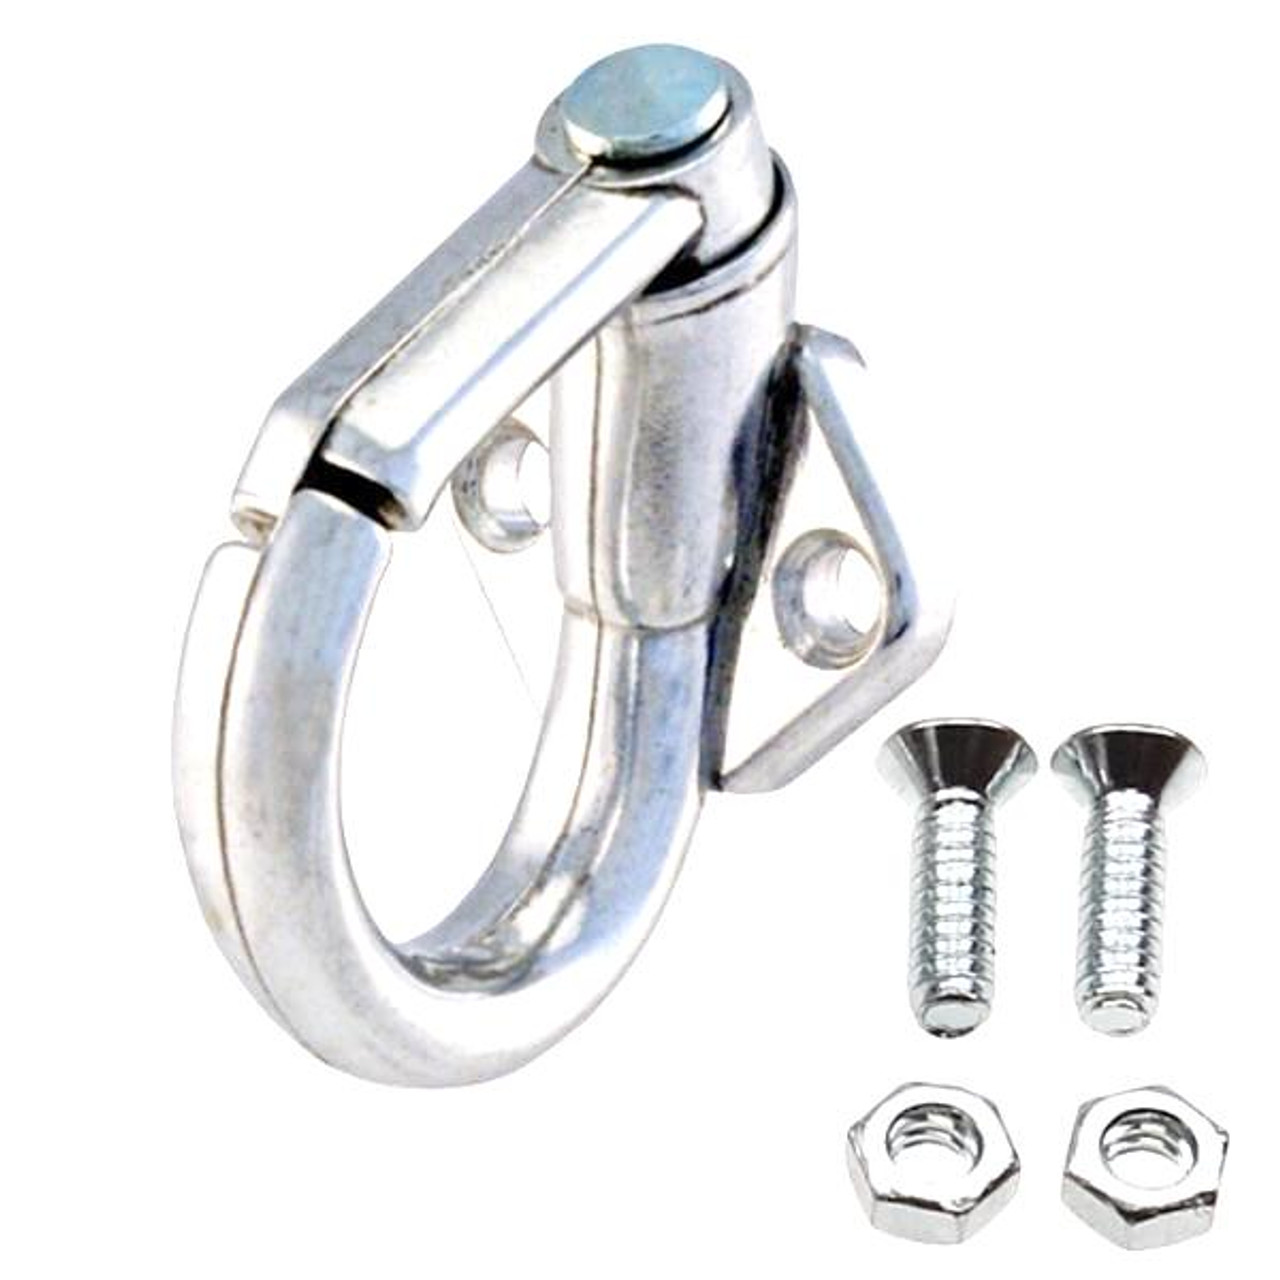 Piaggio Vespa Helmet / Bag Hook for Mopeds and Scooter